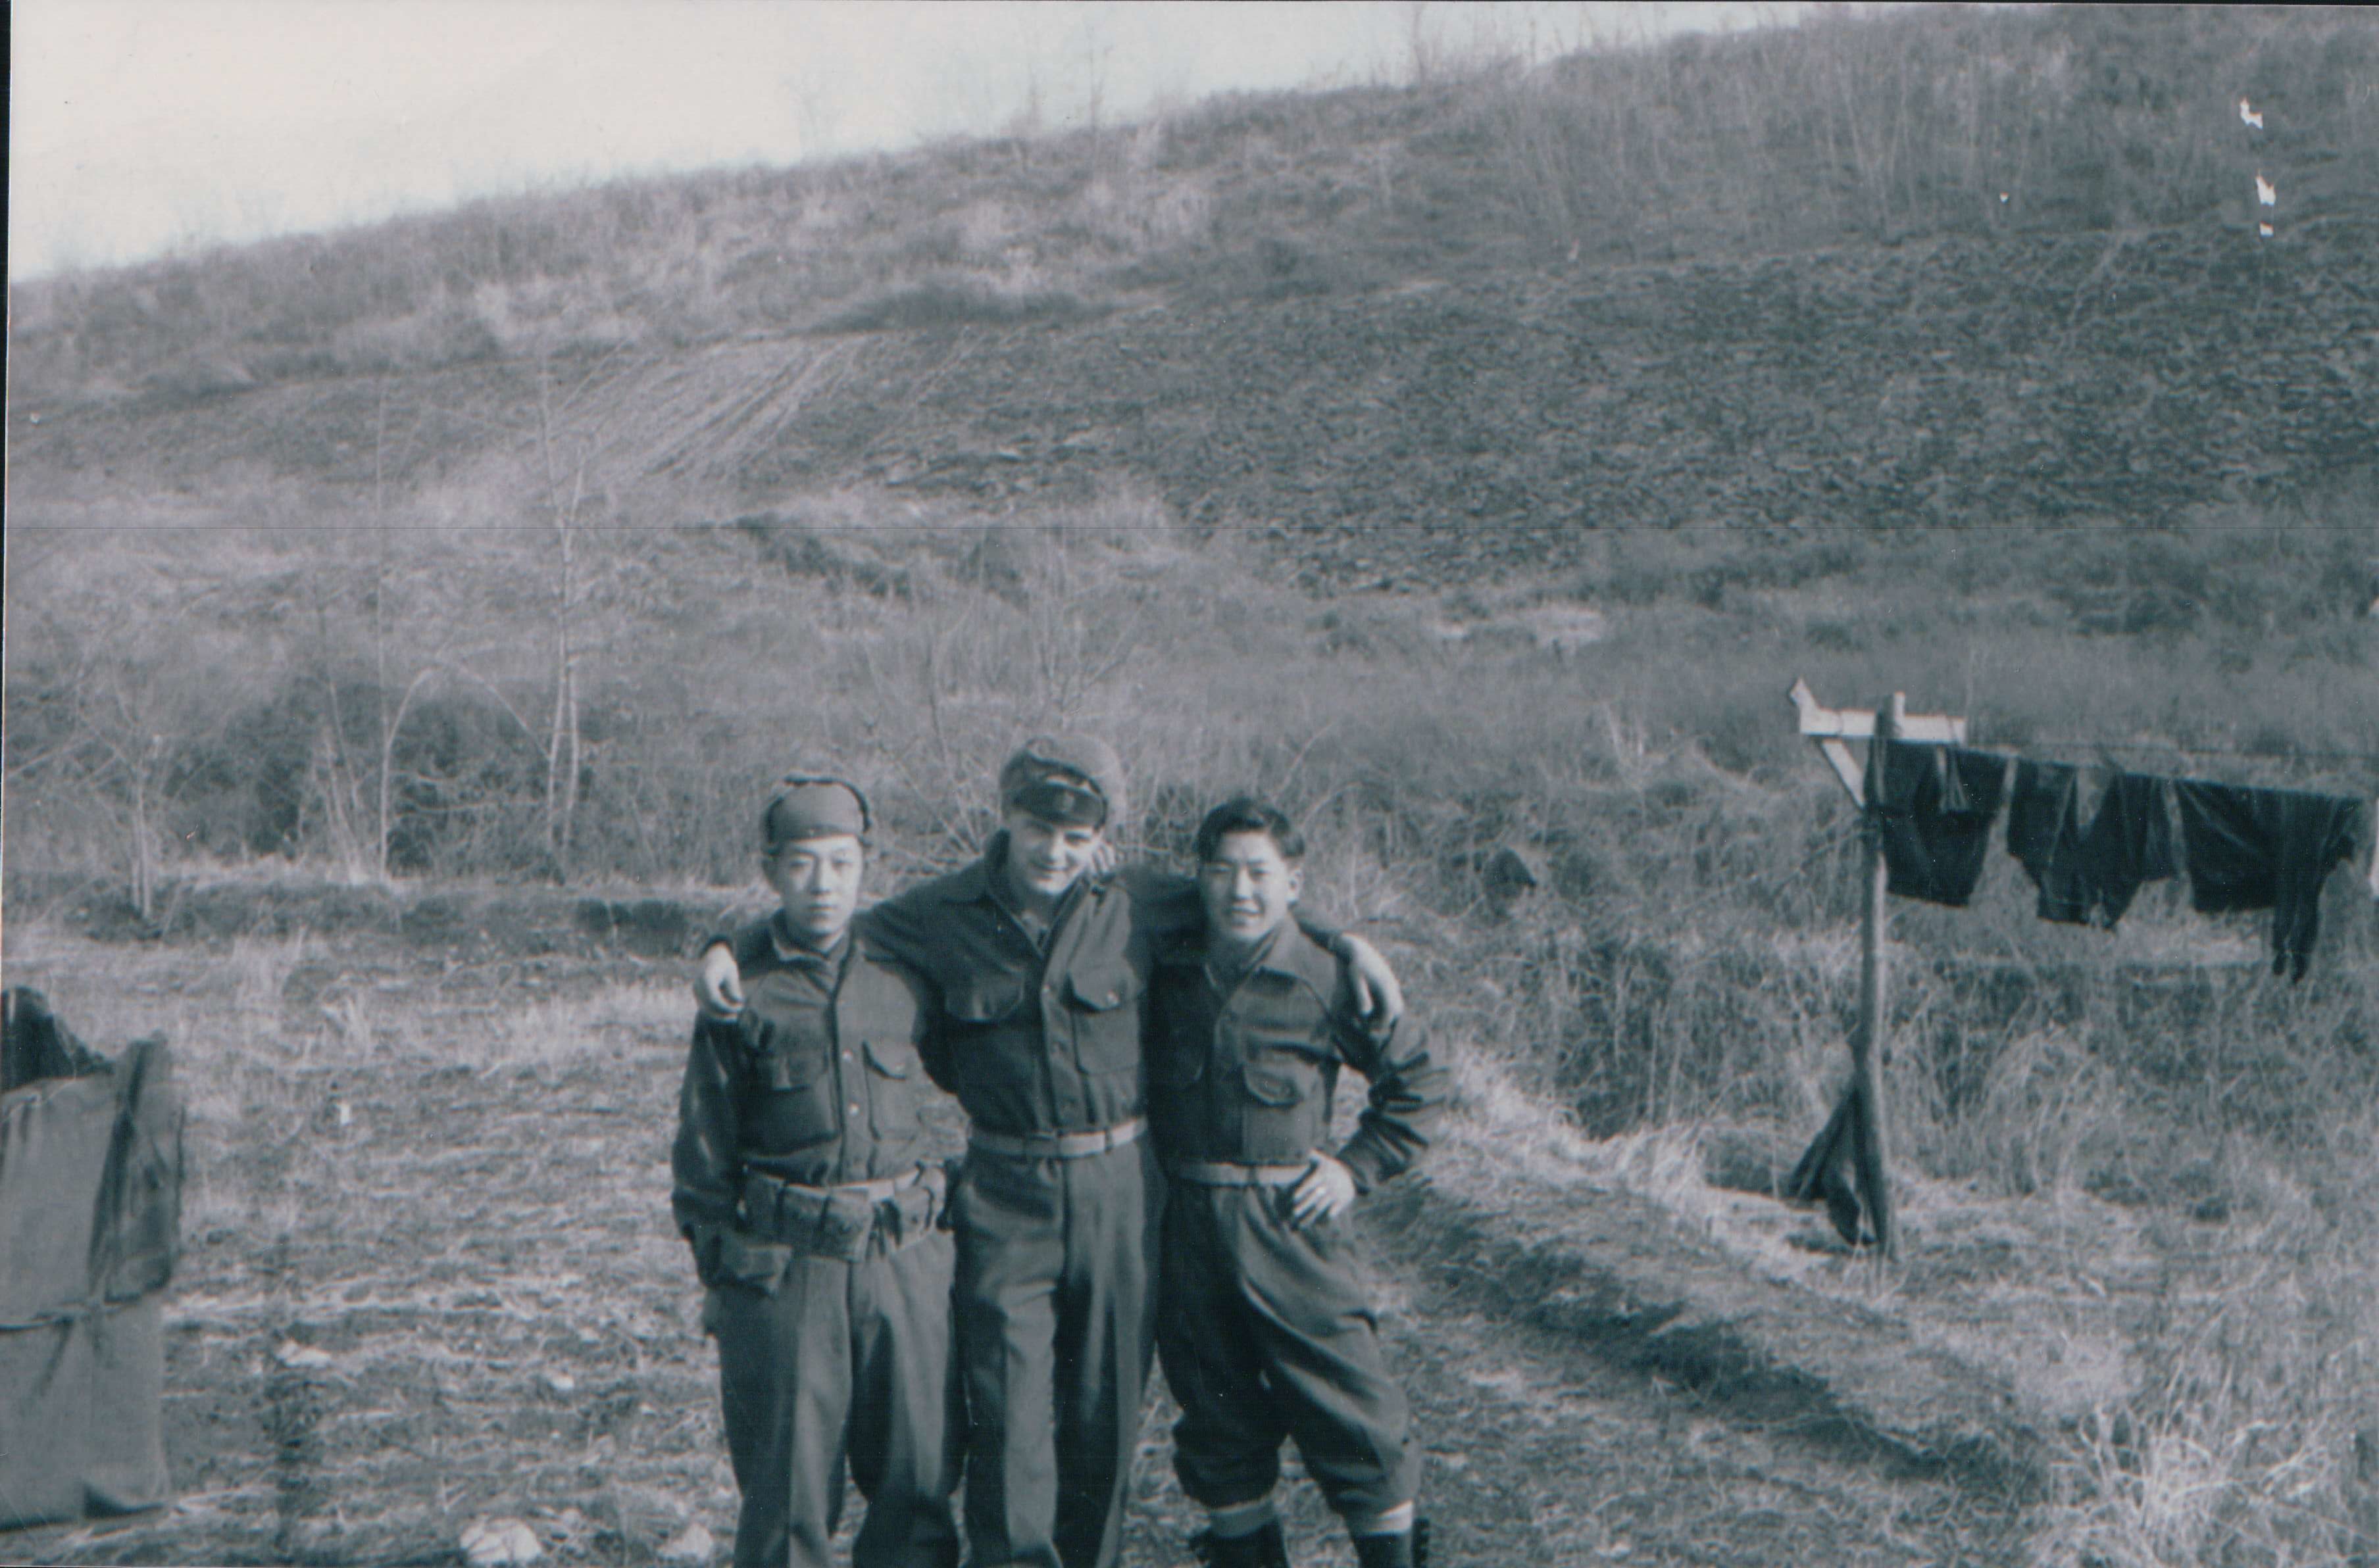 Ray Green with the ROK Soldiers